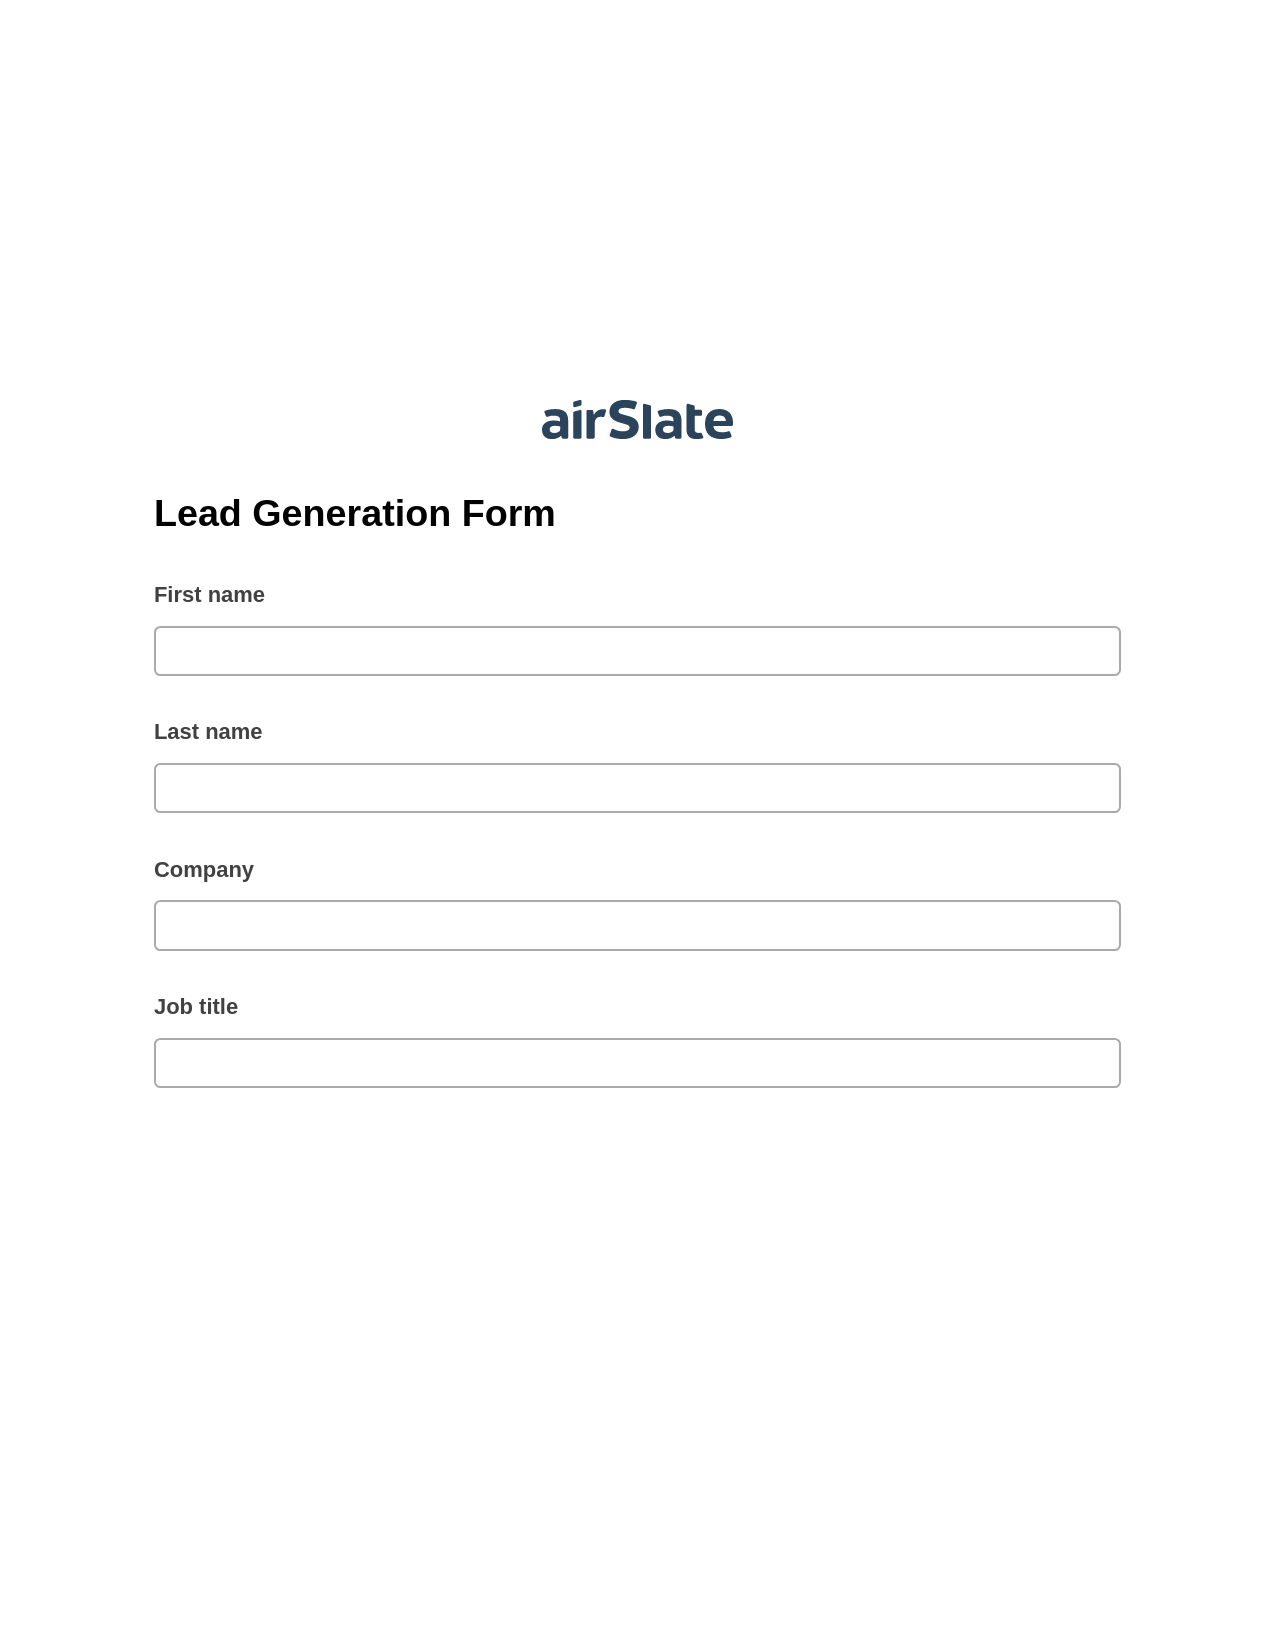 Lead Generation Form Pre-fill from Salesforce Records Bot, Remove Tags From Slate Bot, Export to Google Sheet Bot